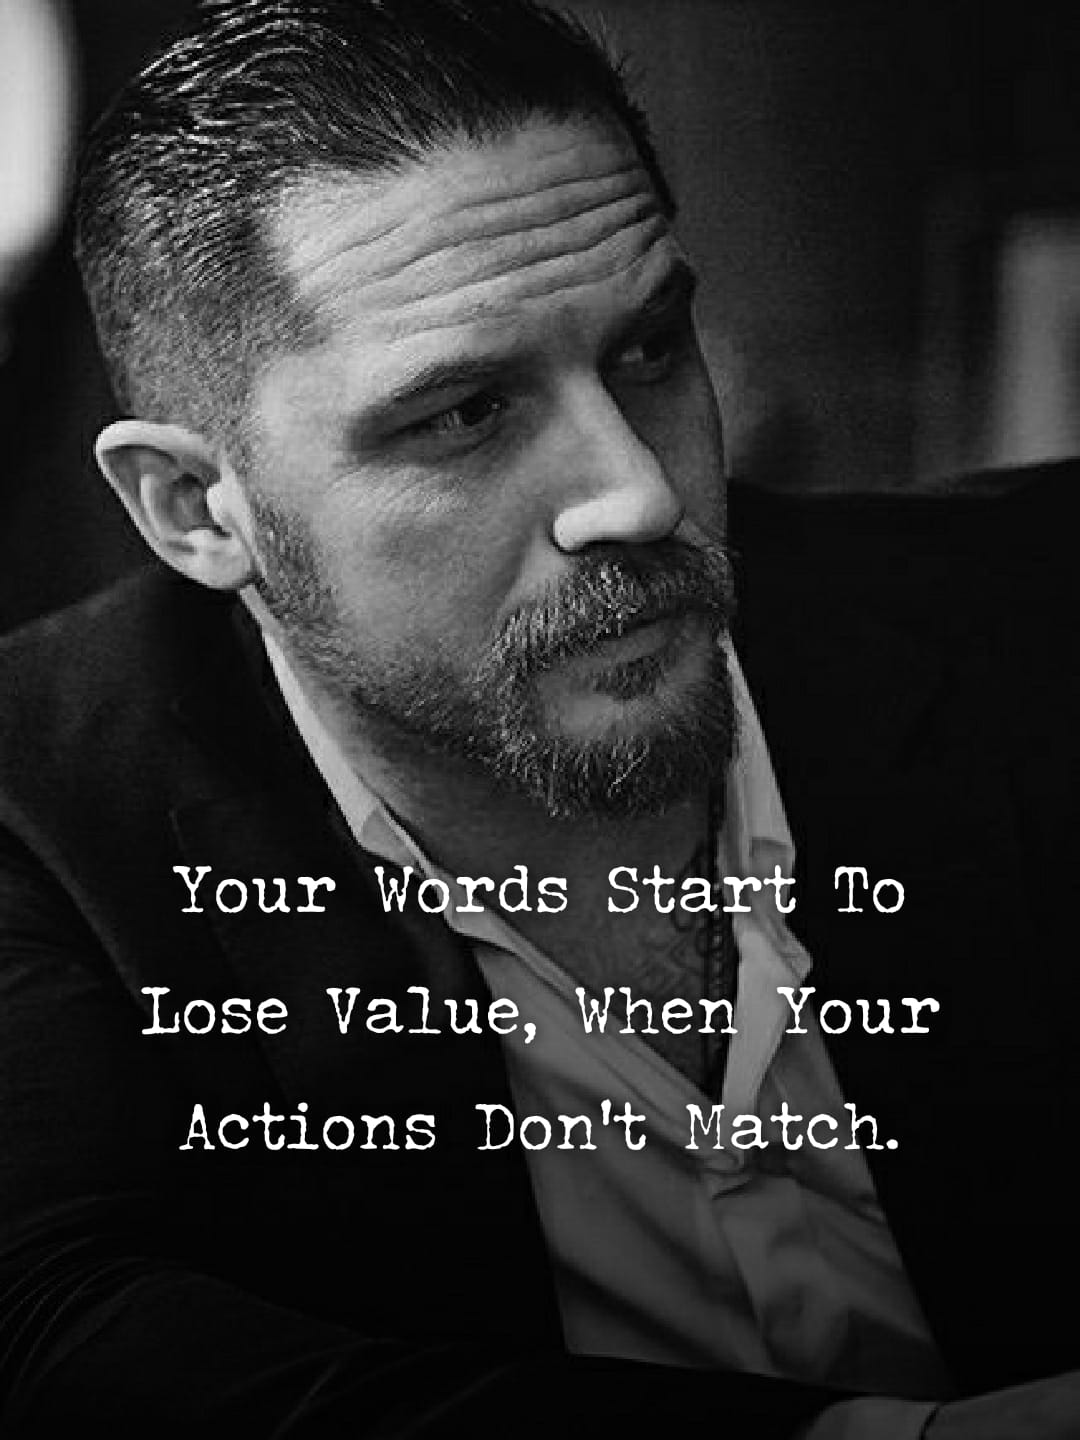 Your words start to lose value when your actions don’t match.